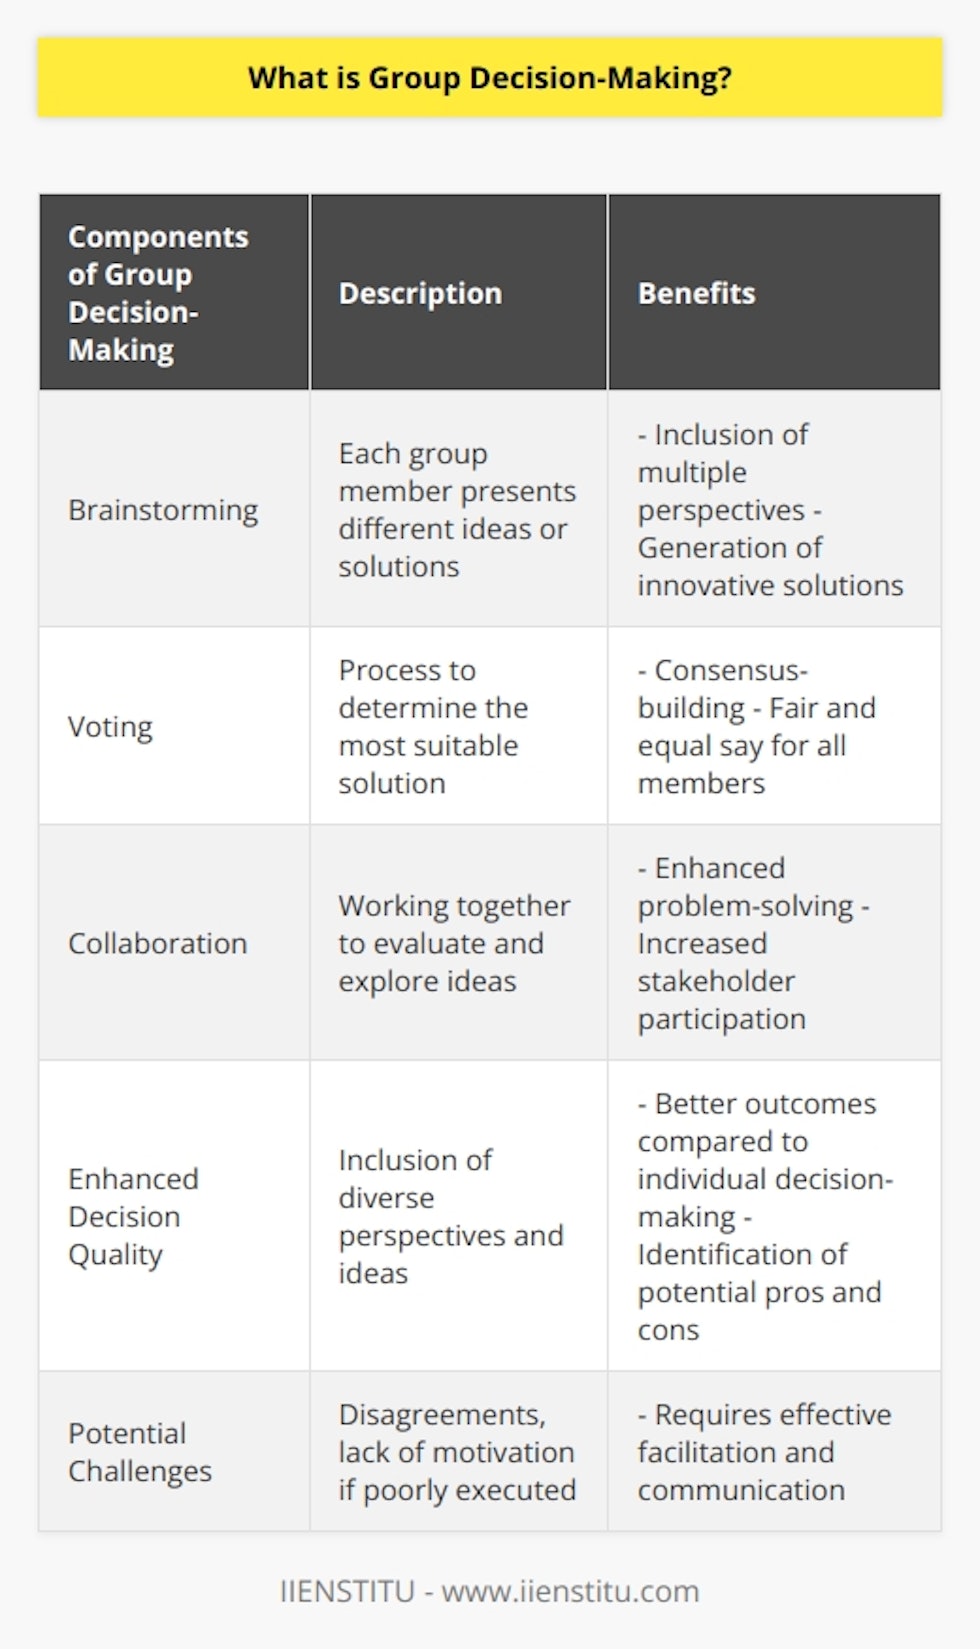 Group decision-making is the process of creating a collective decision within a group of individuals. It encompasses various aspects such as communication, cooperation, problem-solving, and consensus-building. The objective of group decision-making is to make decisions that benefit the entire group while ensuring that every member has an equal say in the process.Group decision-making can be applied in diverse contexts, ranging from business meetings to family gatherings. It is an essential tool for organizations to ensure that all individuals involved in the decision-making process have an equal voice and that their ideas are taken into consideration. By involving multiple perspectives, group decision-making fosters collaboration and problem-solving among team members, leading to better outcomes compared to decisions made by one person alone.Typically, group decision-making involves two primary components: brainstorming and voting. During the brainstorming stage, each group member presents different ideas or solutions, and the entire group engages in a discussion to evaluate and explore these ideas. This discussion may involve debating various points and considering the potential pros and cons associated with each proposal. Once all opinions have been heard, a voting process can determine which solution is deemed the most suitable for the group.When executed effectively, group decision-making can result in better decisions than those made by an individual alone. This is due to the inclusion of multiple perspectives and ideas before arriving at a final choice. Furthermore, group decision-making facilitates collaboration between team members, enabling the generation of innovative solutions that may not have been discovered otherwise. However, if done poorly, group decision-making can lead to disagreements among stakeholders or, worse, a lack of motivation to make progress.In conclusion, group decision-making is a powerful tool for organizations and teams as it embraces diverse perspectives when making decisions, leading to superior outcomes compared to relying solely on one individual's opinion. Moreover, it encourages collaboration among team members, fostering the development of innovative solutions that may be challenging to achieve when working alone. Ultimately, organizations that effectively utilize group decision-making strategies can experience enhanced productivity levels due to increased stakeholder participation in any project or task.